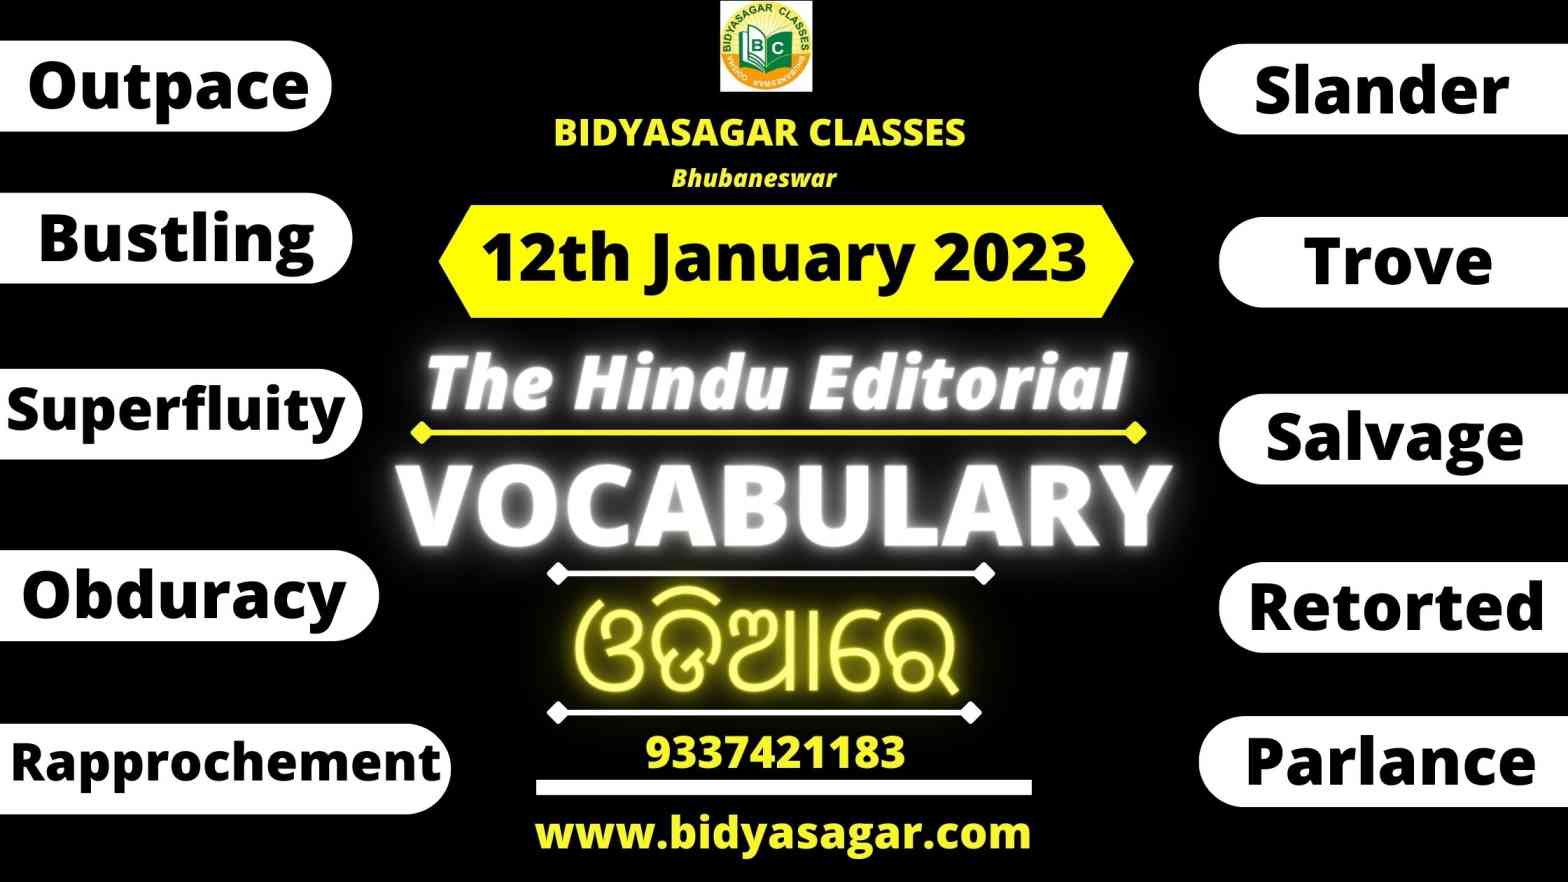 The Hindu Editorial Vocabulary of 12th January 2023